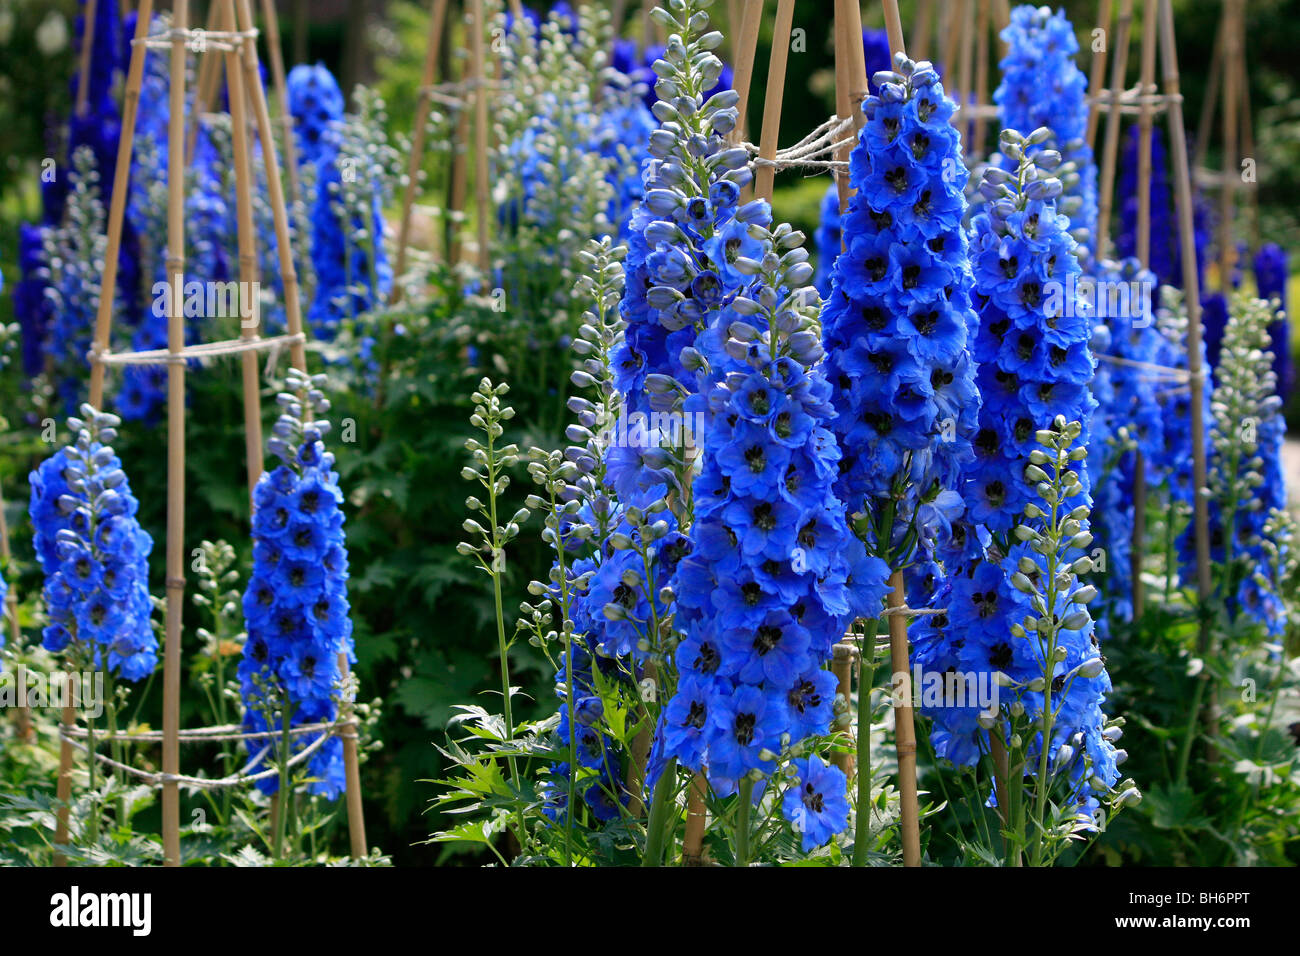 Delphiniums blooming at Alnwick Garden in Northumberland. Stock Photo